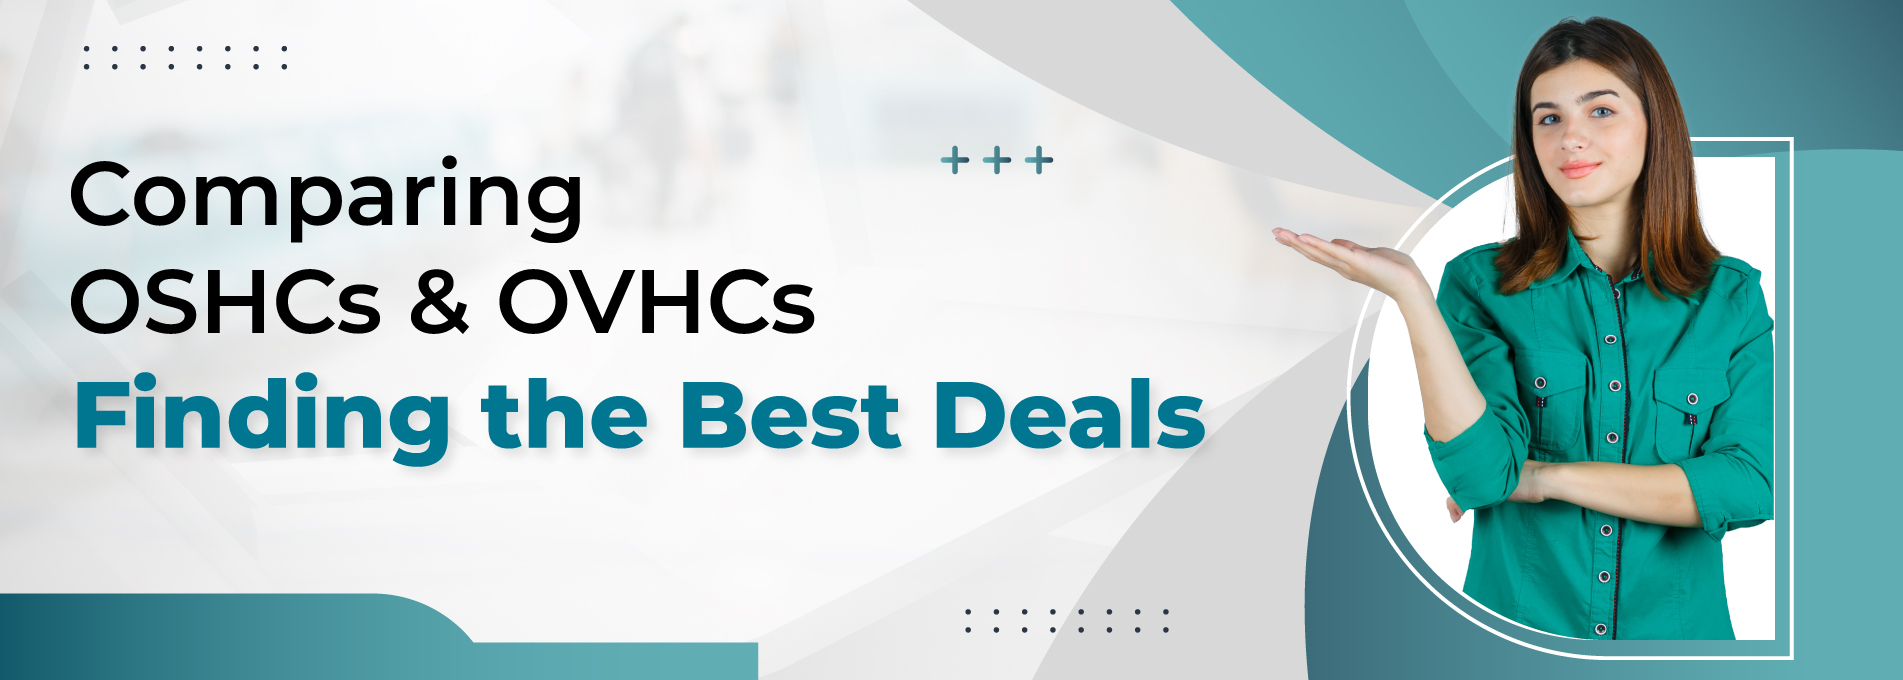 Comparing OSHCs and OVHCs: Finding the Best Deals